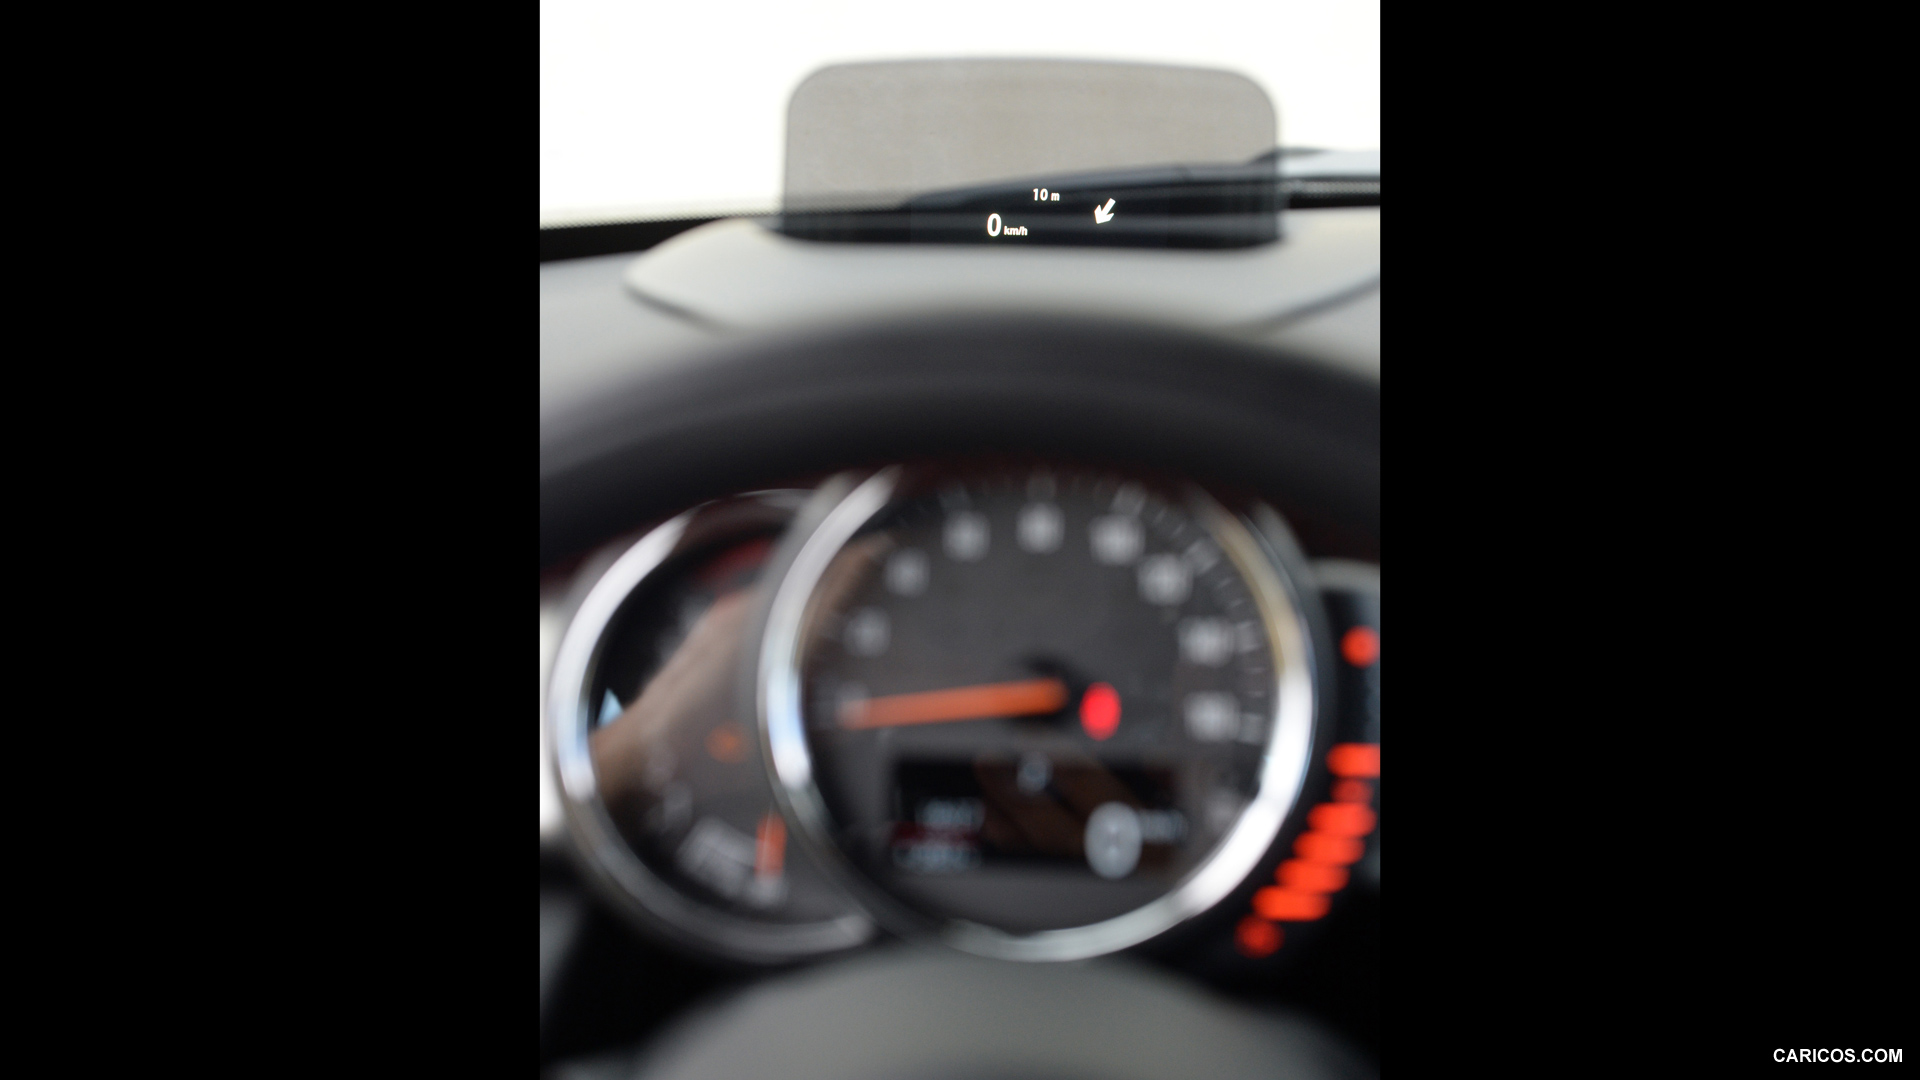 2015 MINI Cooper S - Heads-Up Display - Interior Detail, #243 of 274